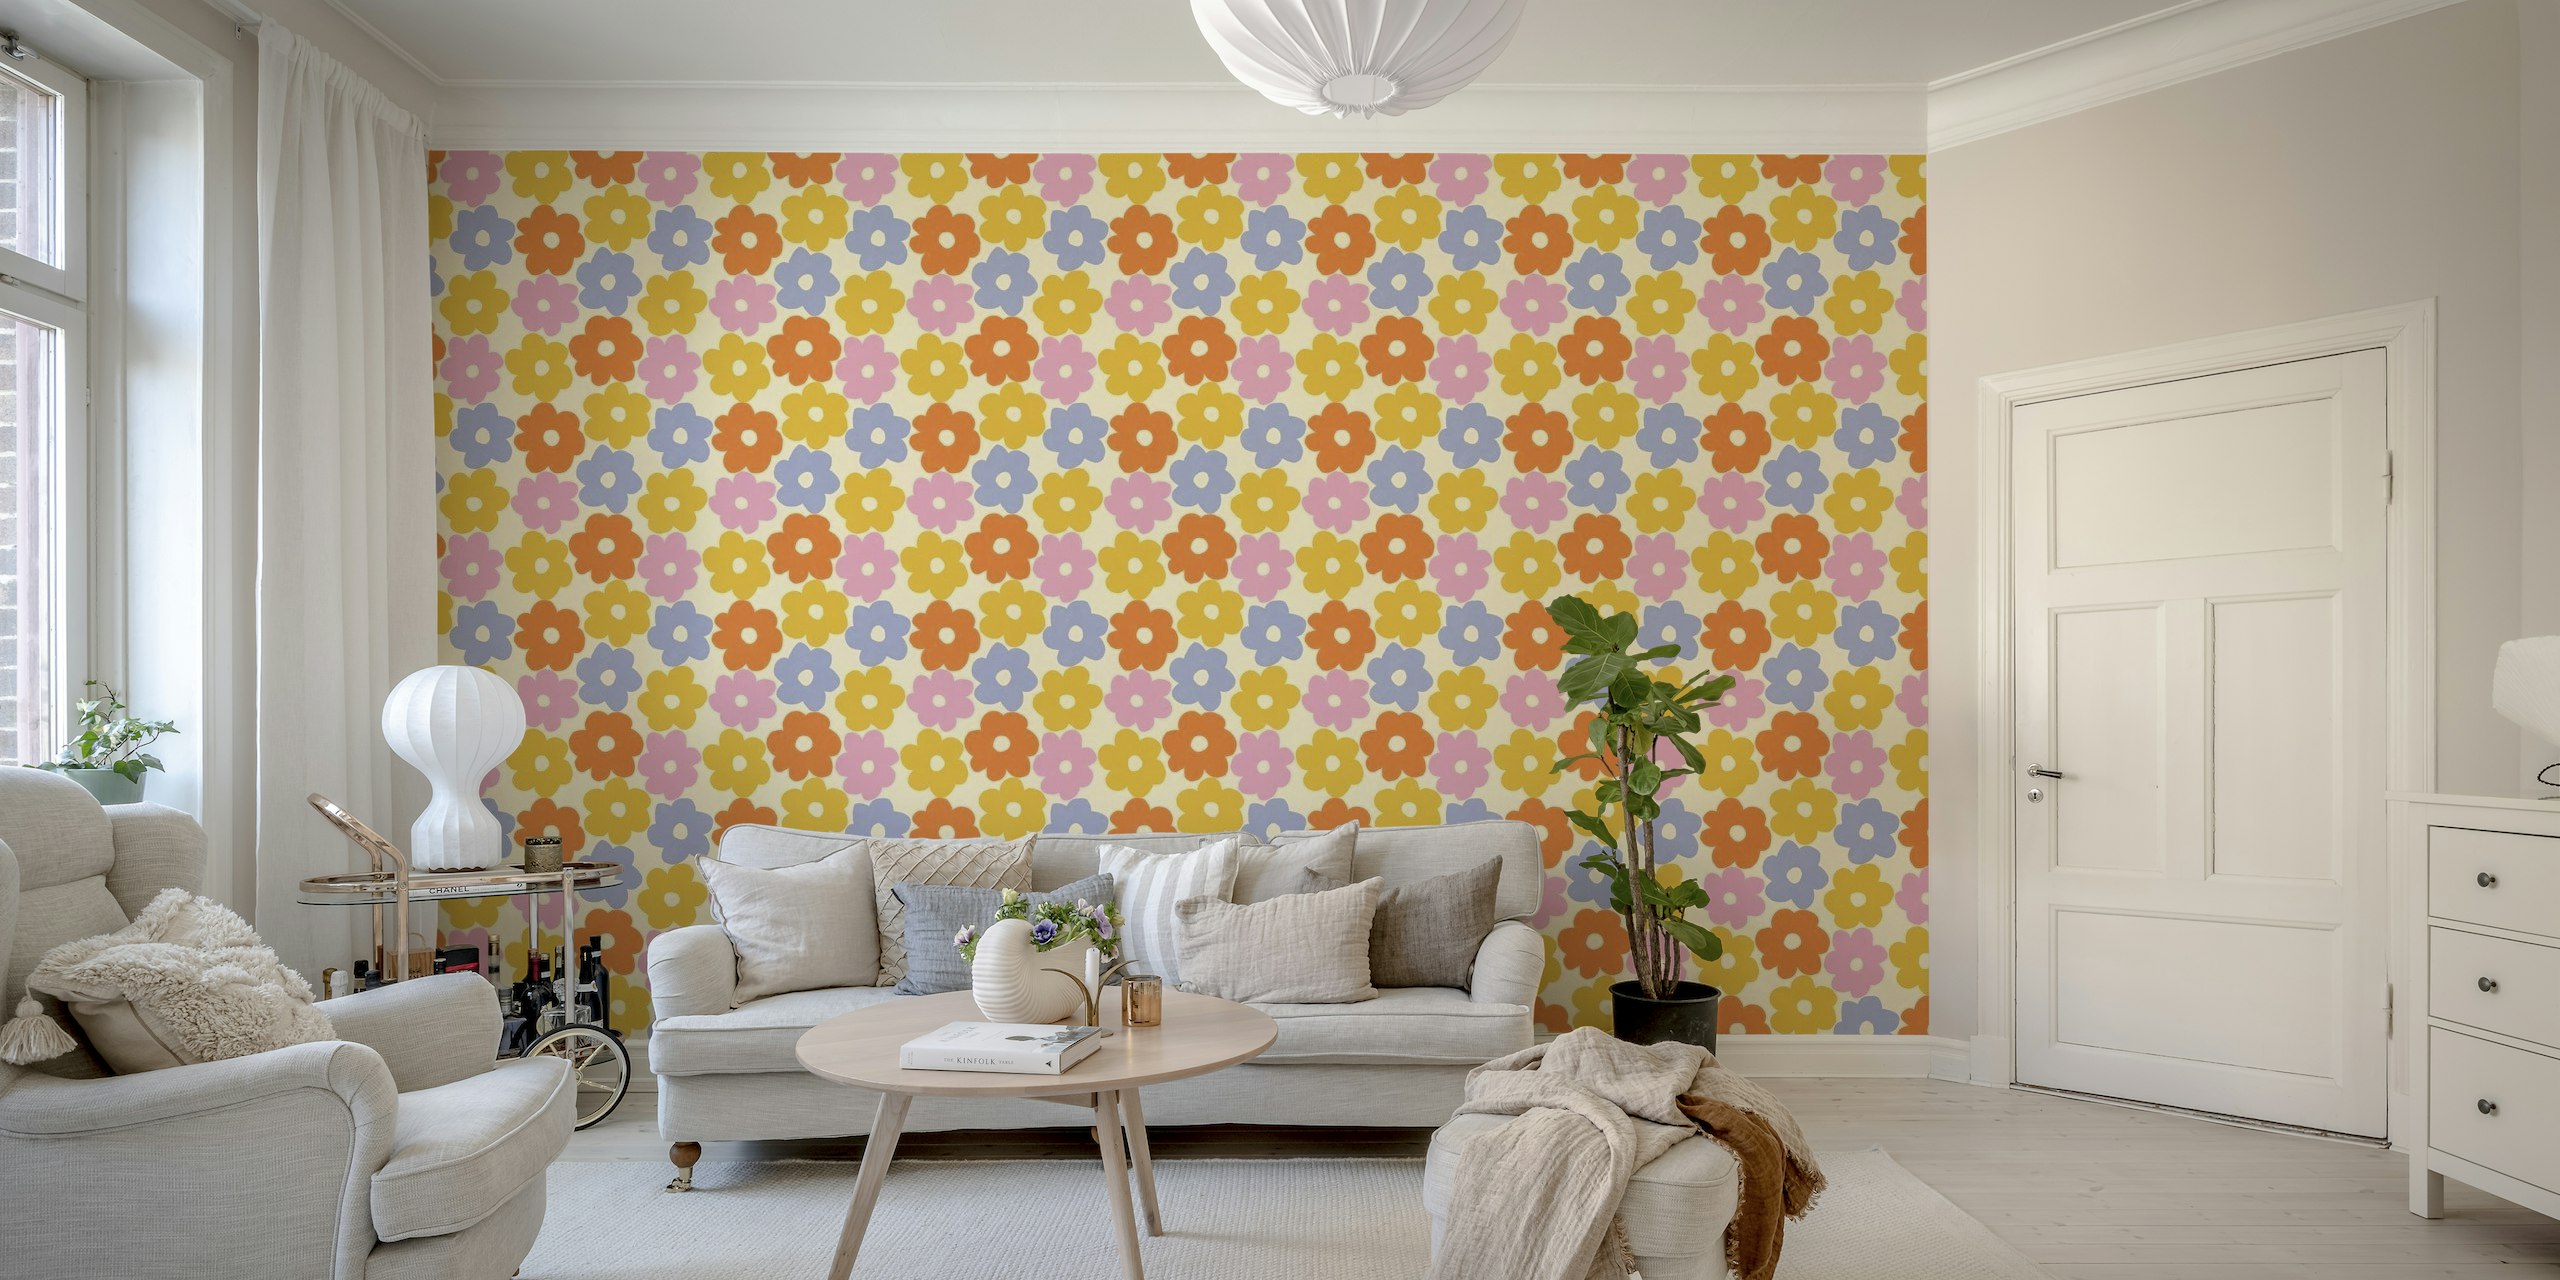 Pastel-colored simple flower pattern wall mural with warm neutral background